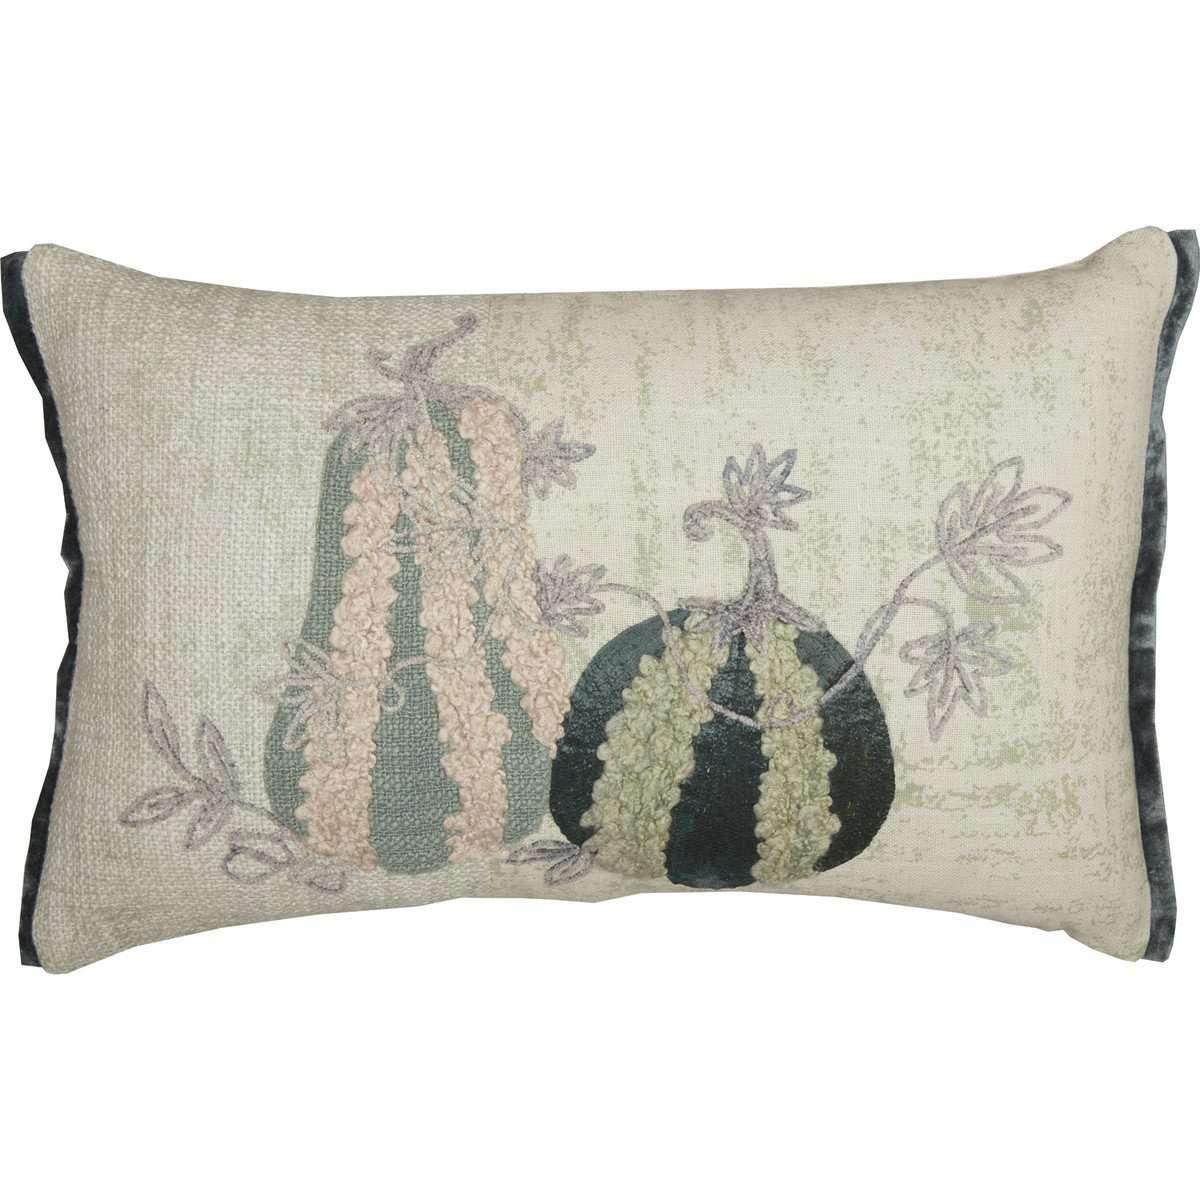 Embroidered Gourd Pillow 14x22 VHC Brands